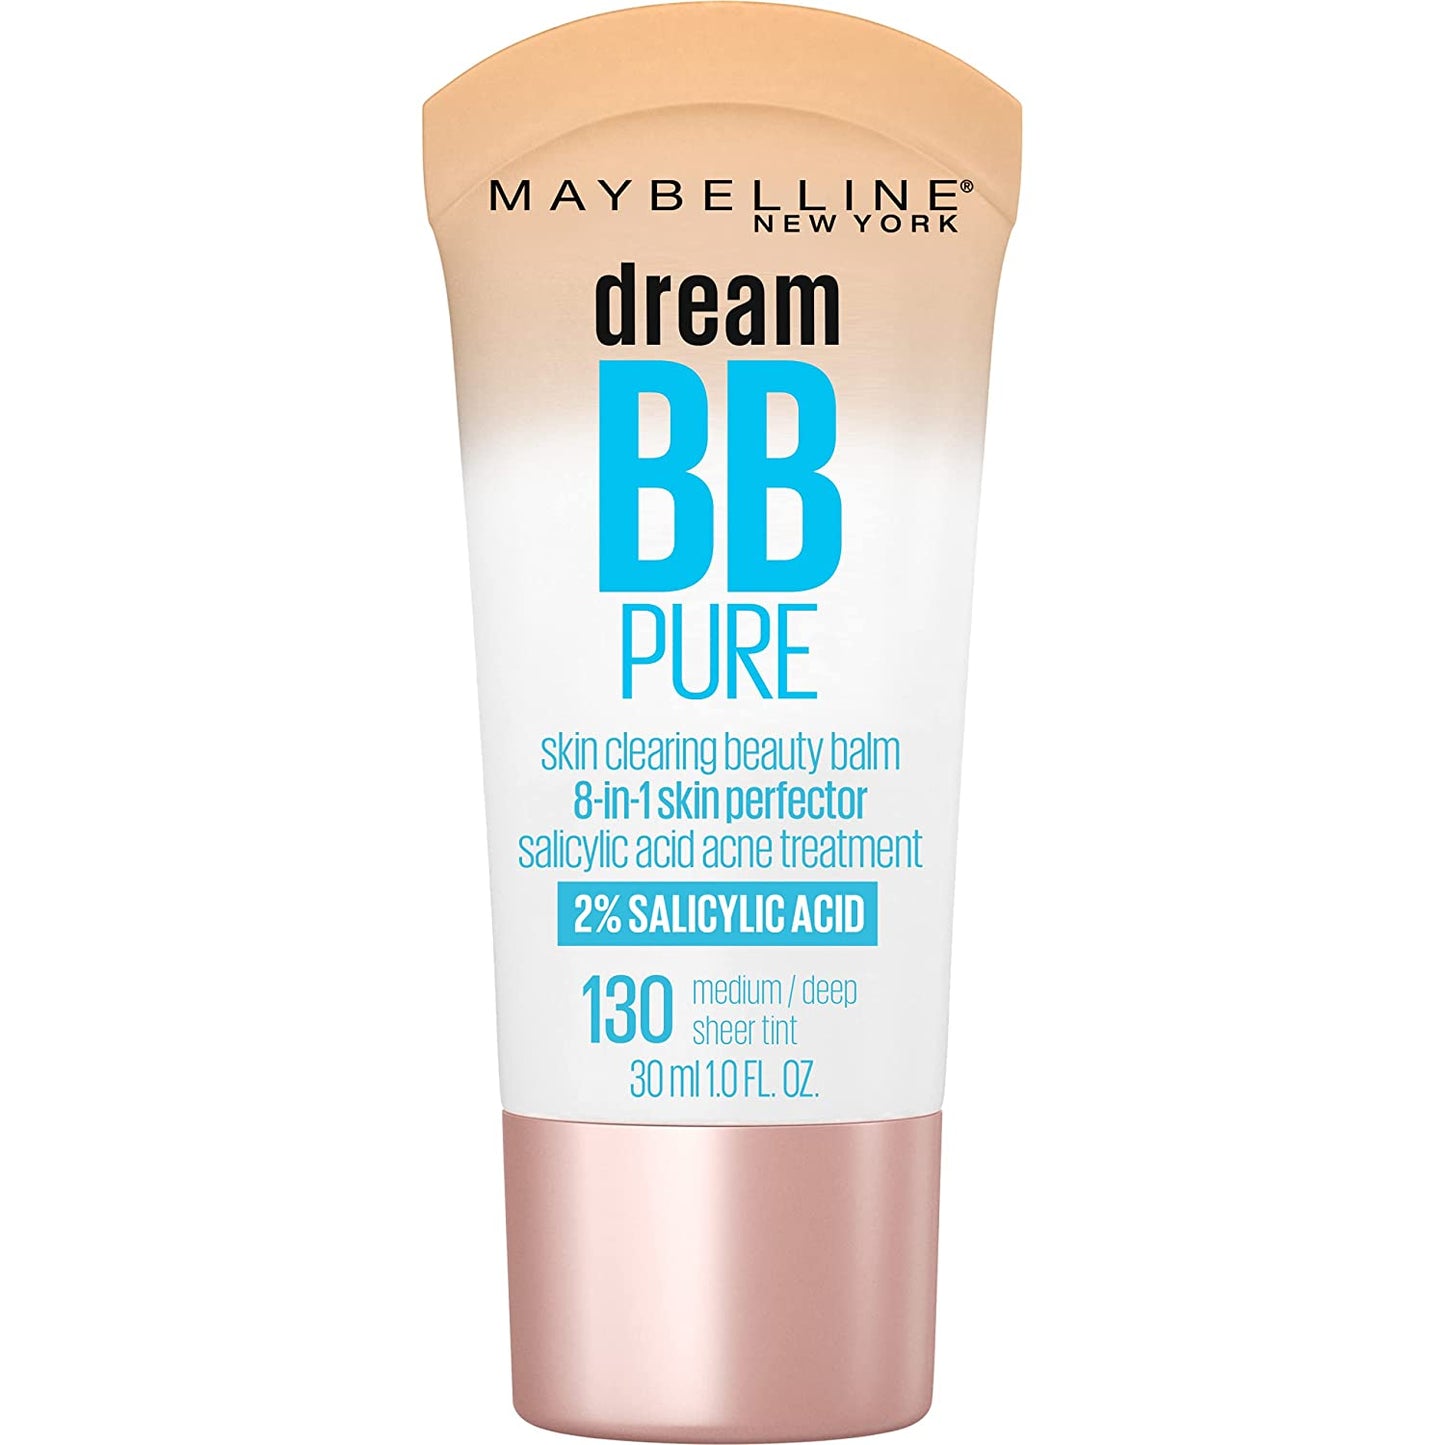 Maybelline New York Dream BB Pure with Sheer Tint Coverage - 30ml / 1.0 fl oz